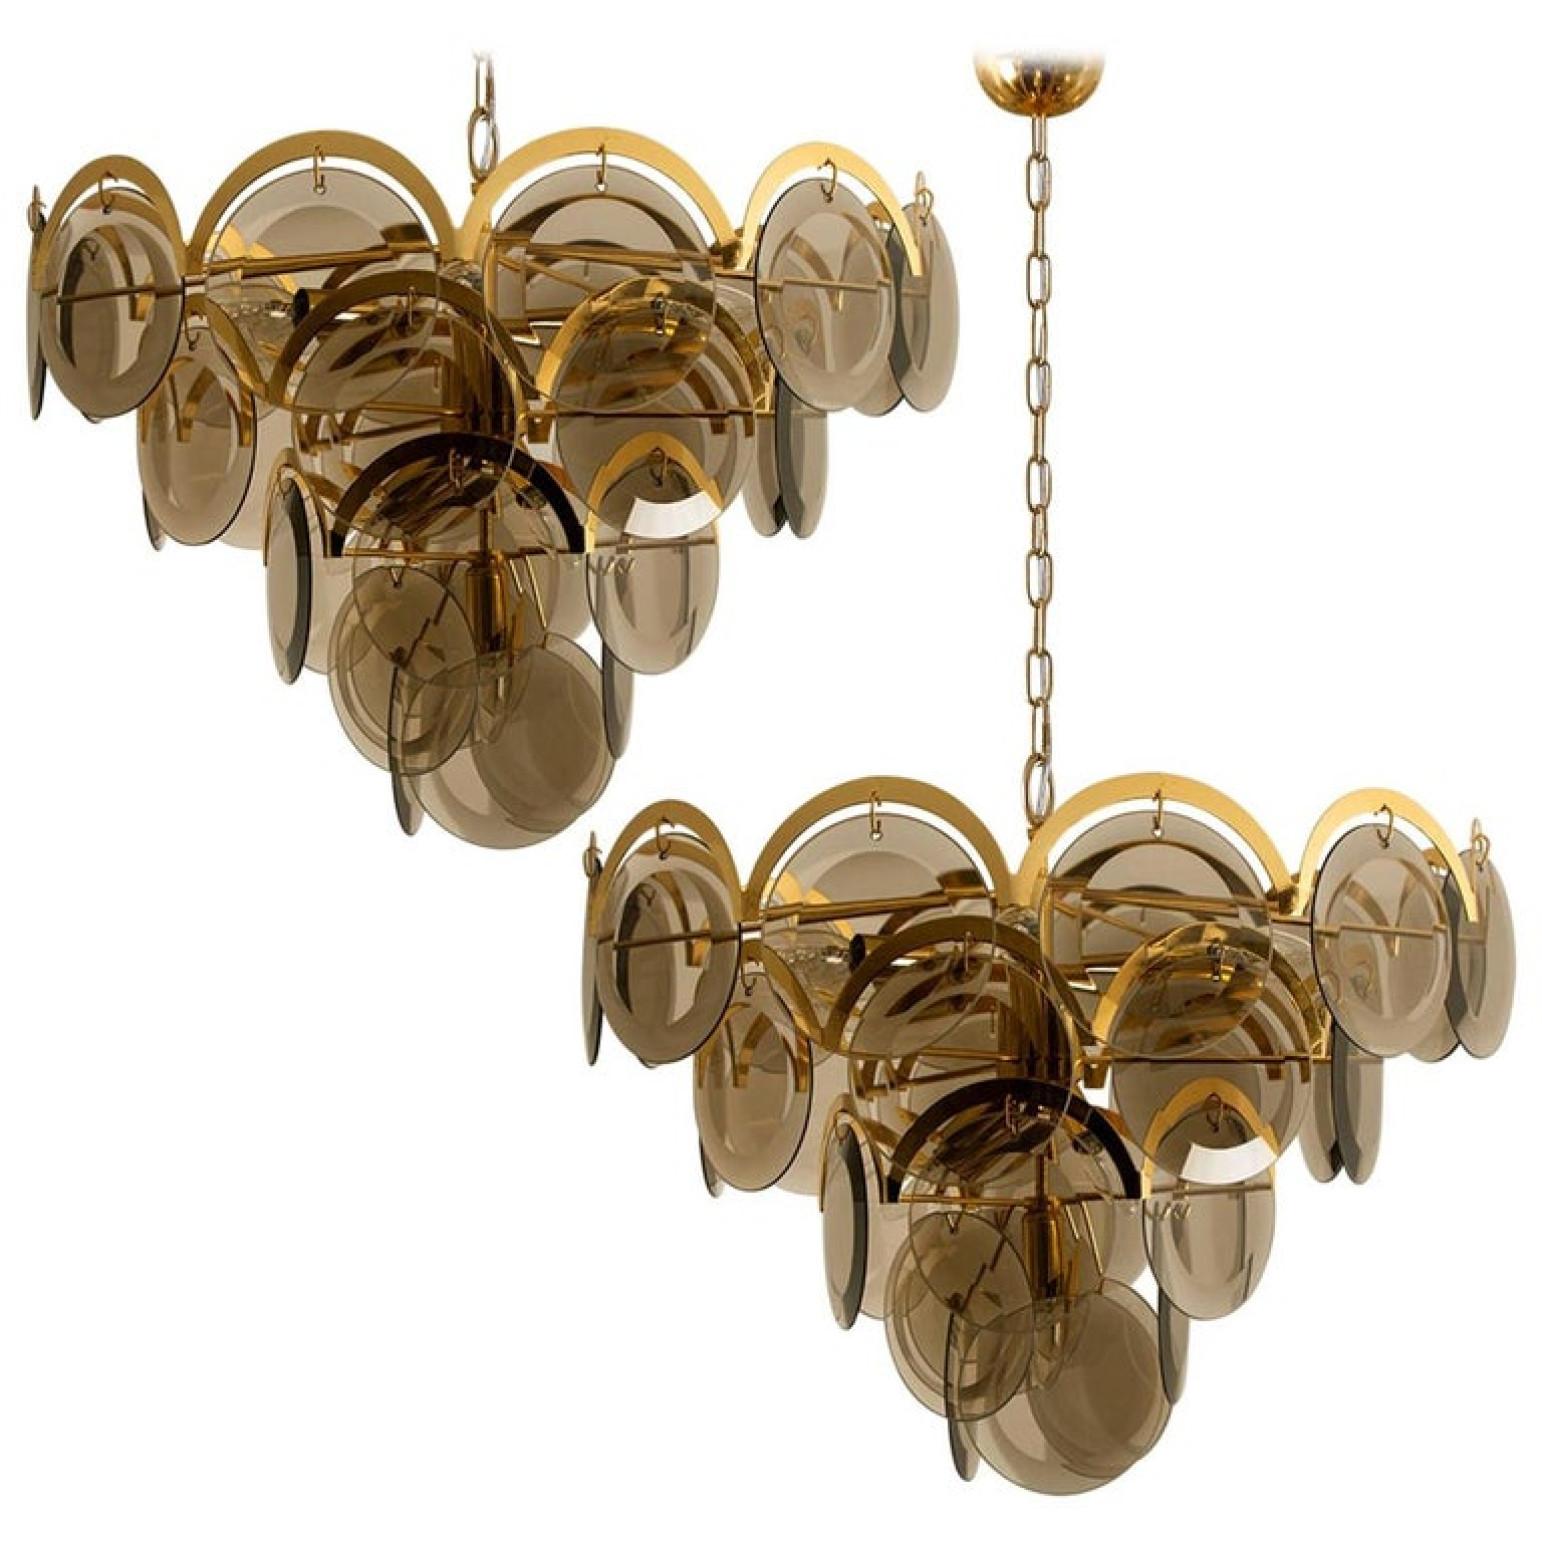 A gorgeous four tiers hanging light fixture, attributed to Vistosi with graduated tiers of 33 smoked round facet chapped glass discs framed by half-moon shaped brass. The chandelier is complete, no hook or glass disk is missing, with its original